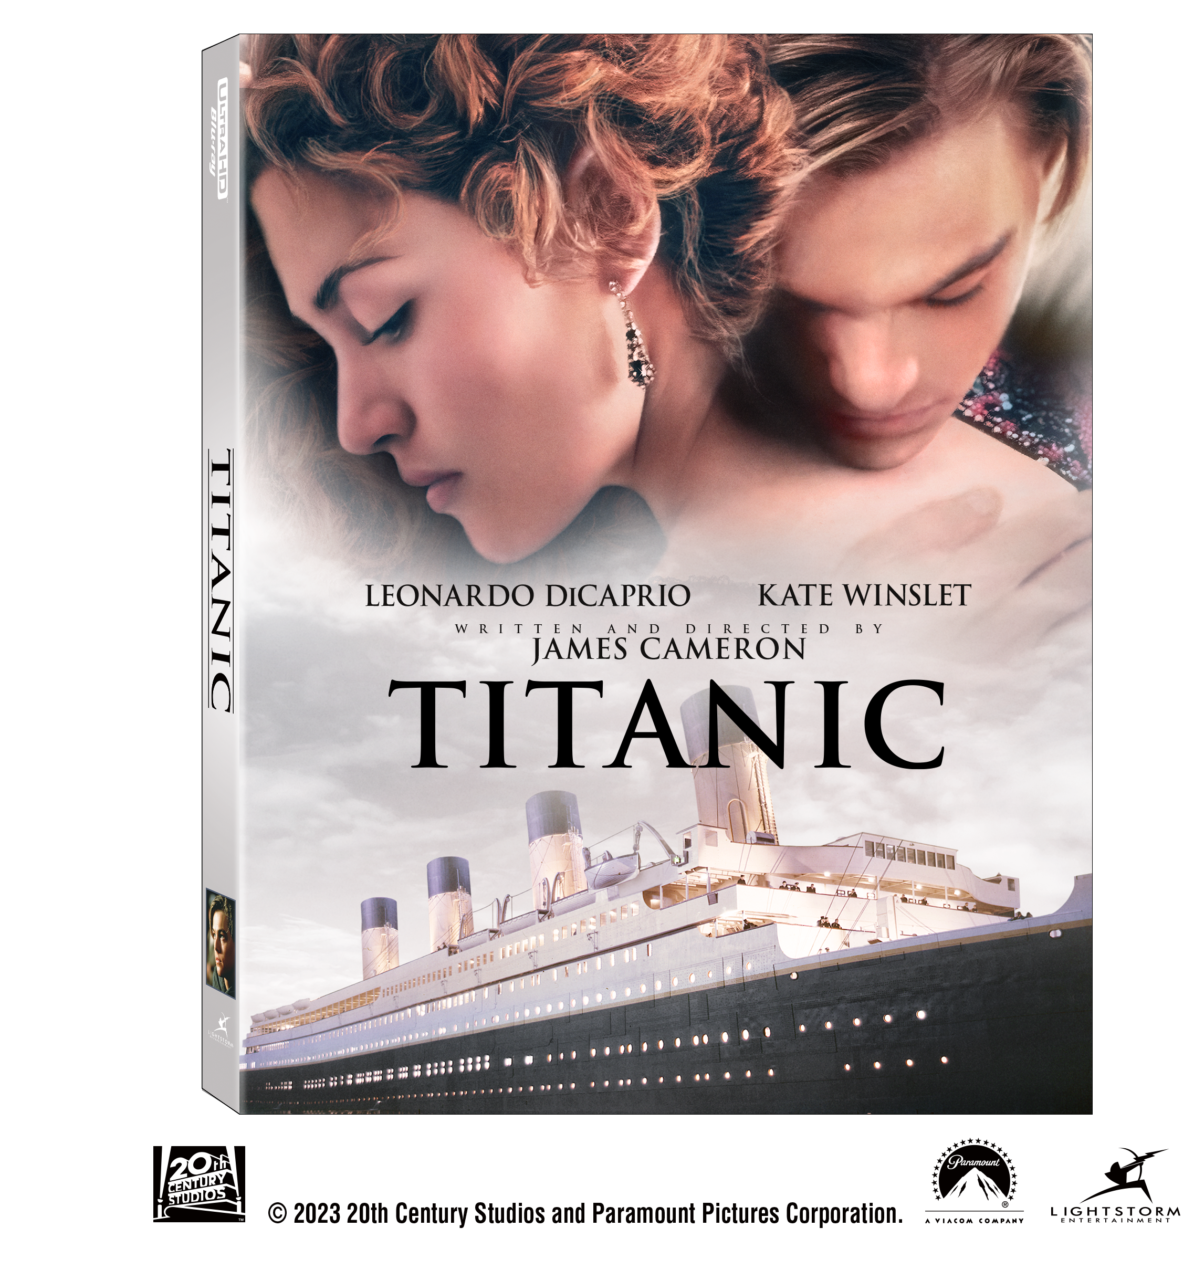 Titanic 4K Ultra HD Combo Pack cover (20th Century Studios Home Entertainment/Disney Home)